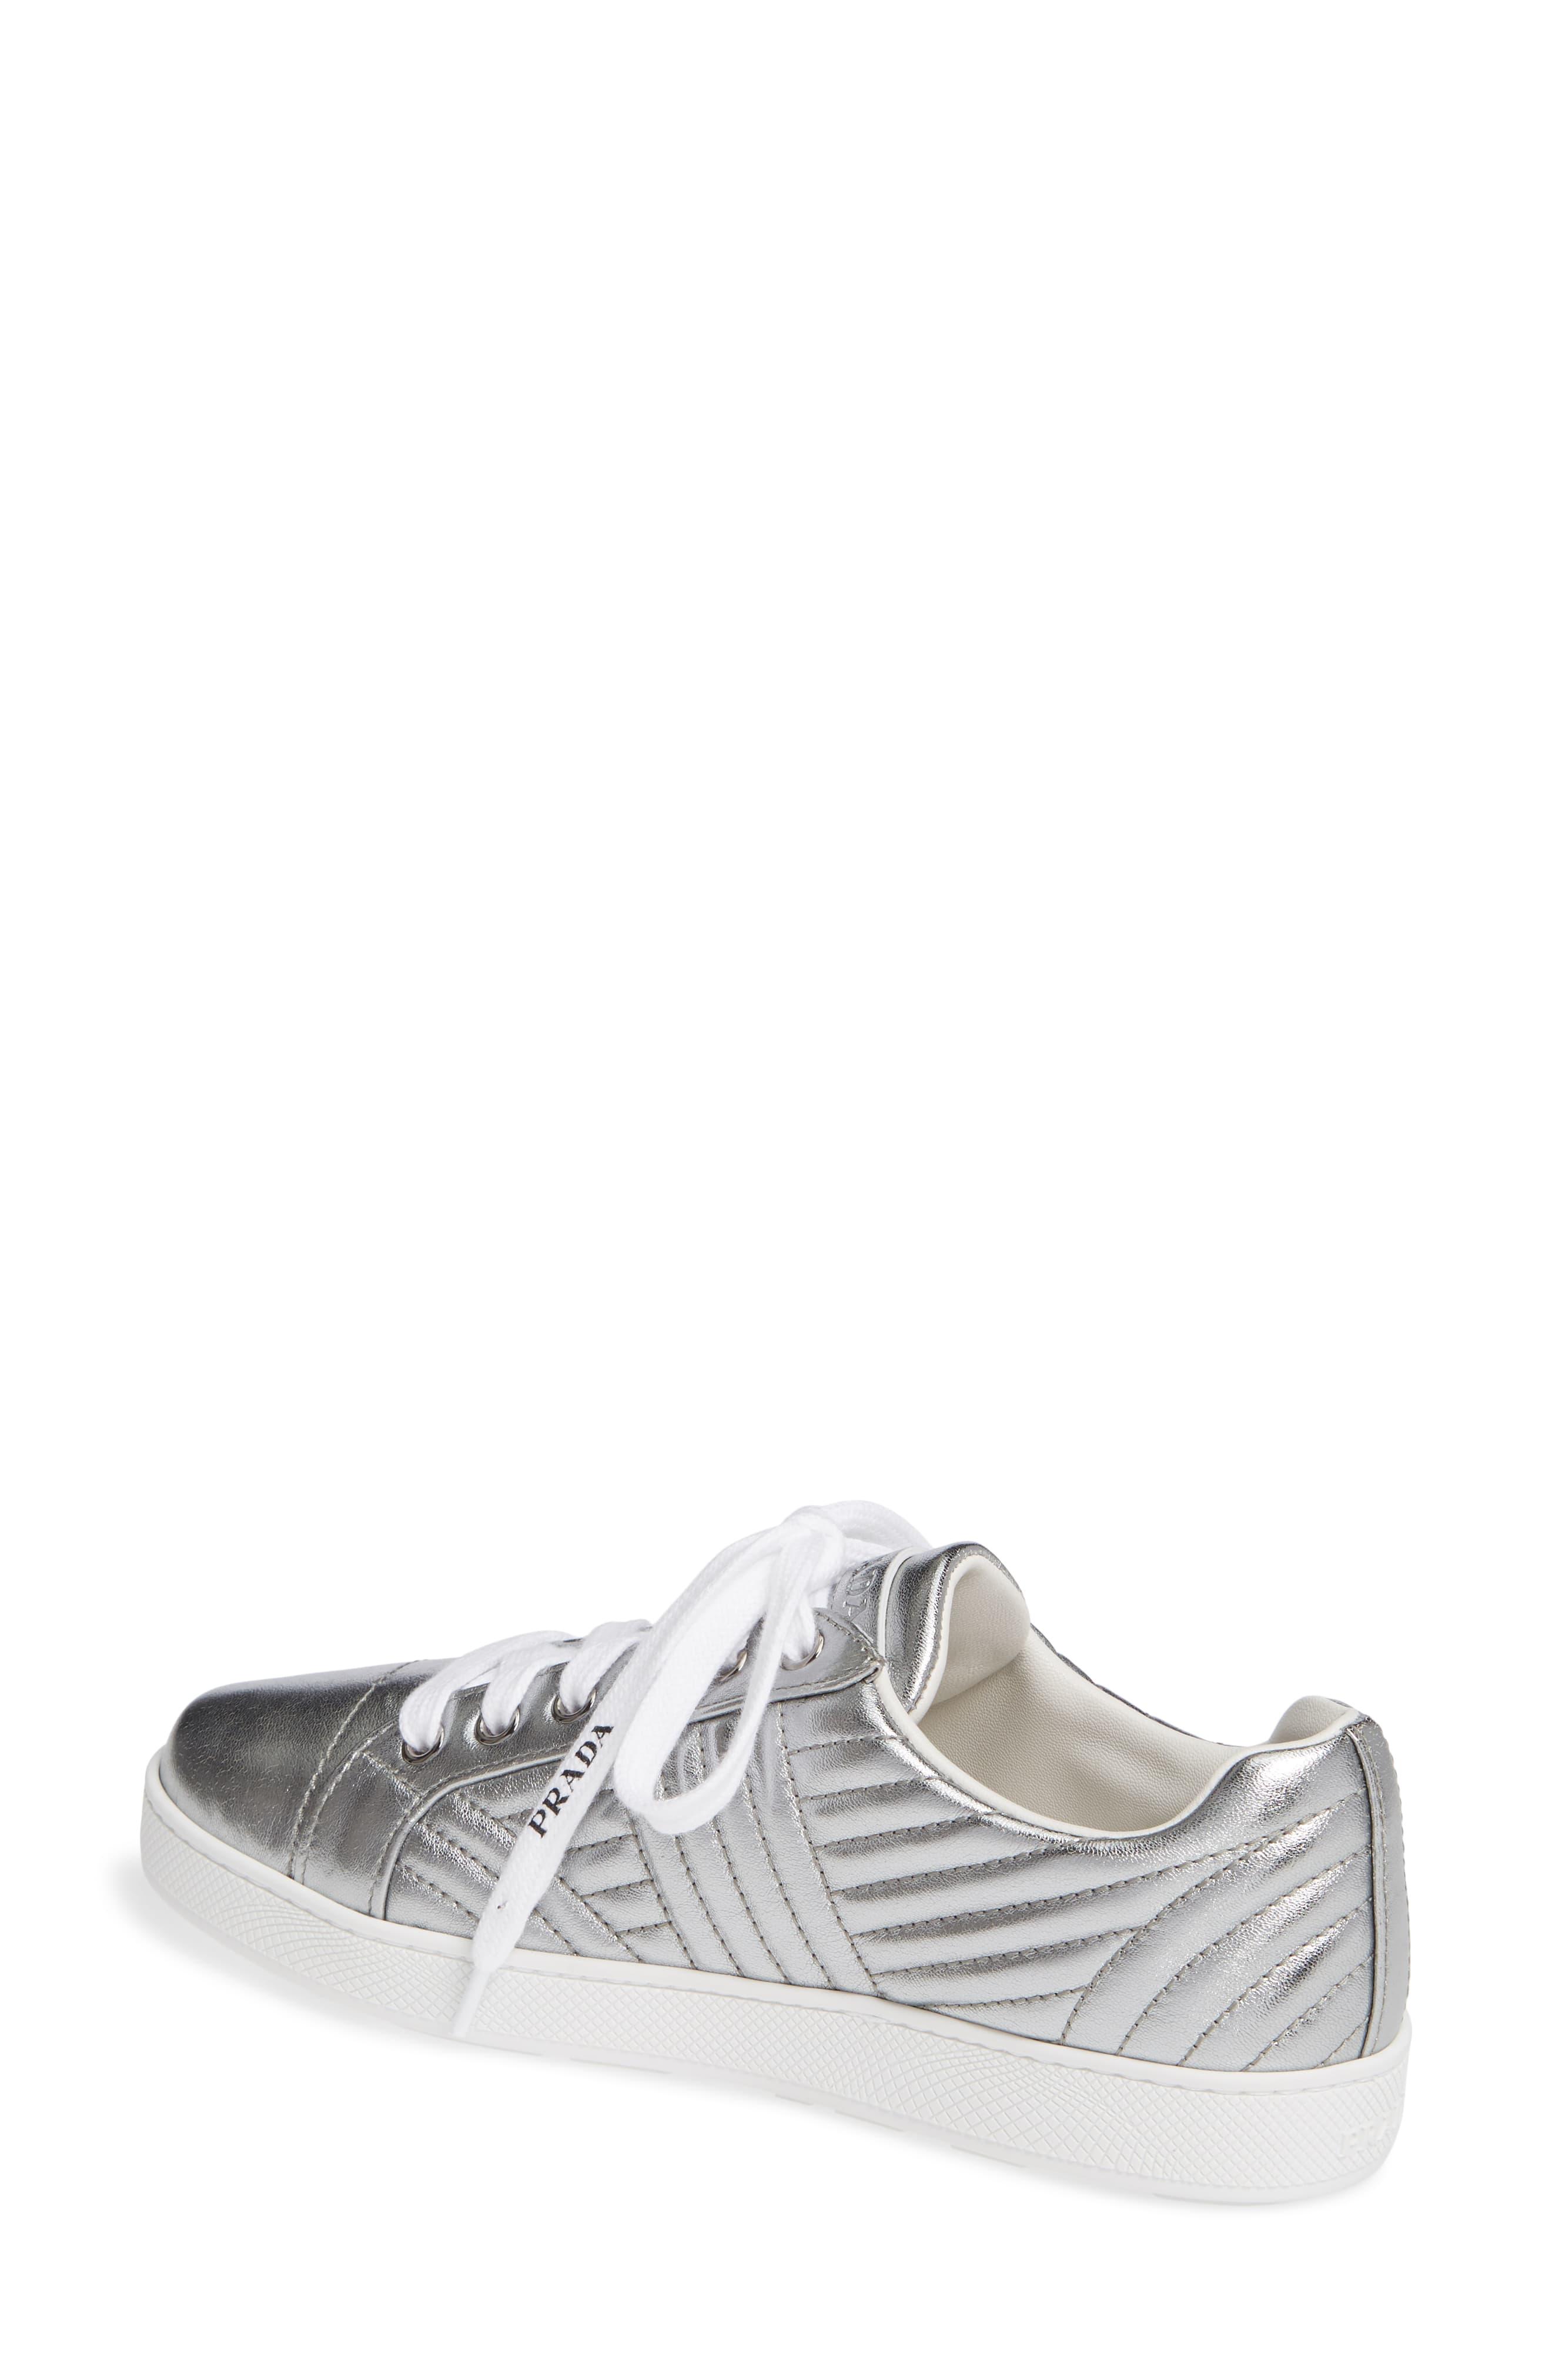 Prada Quilted Leather Sneaker in White - Lyst